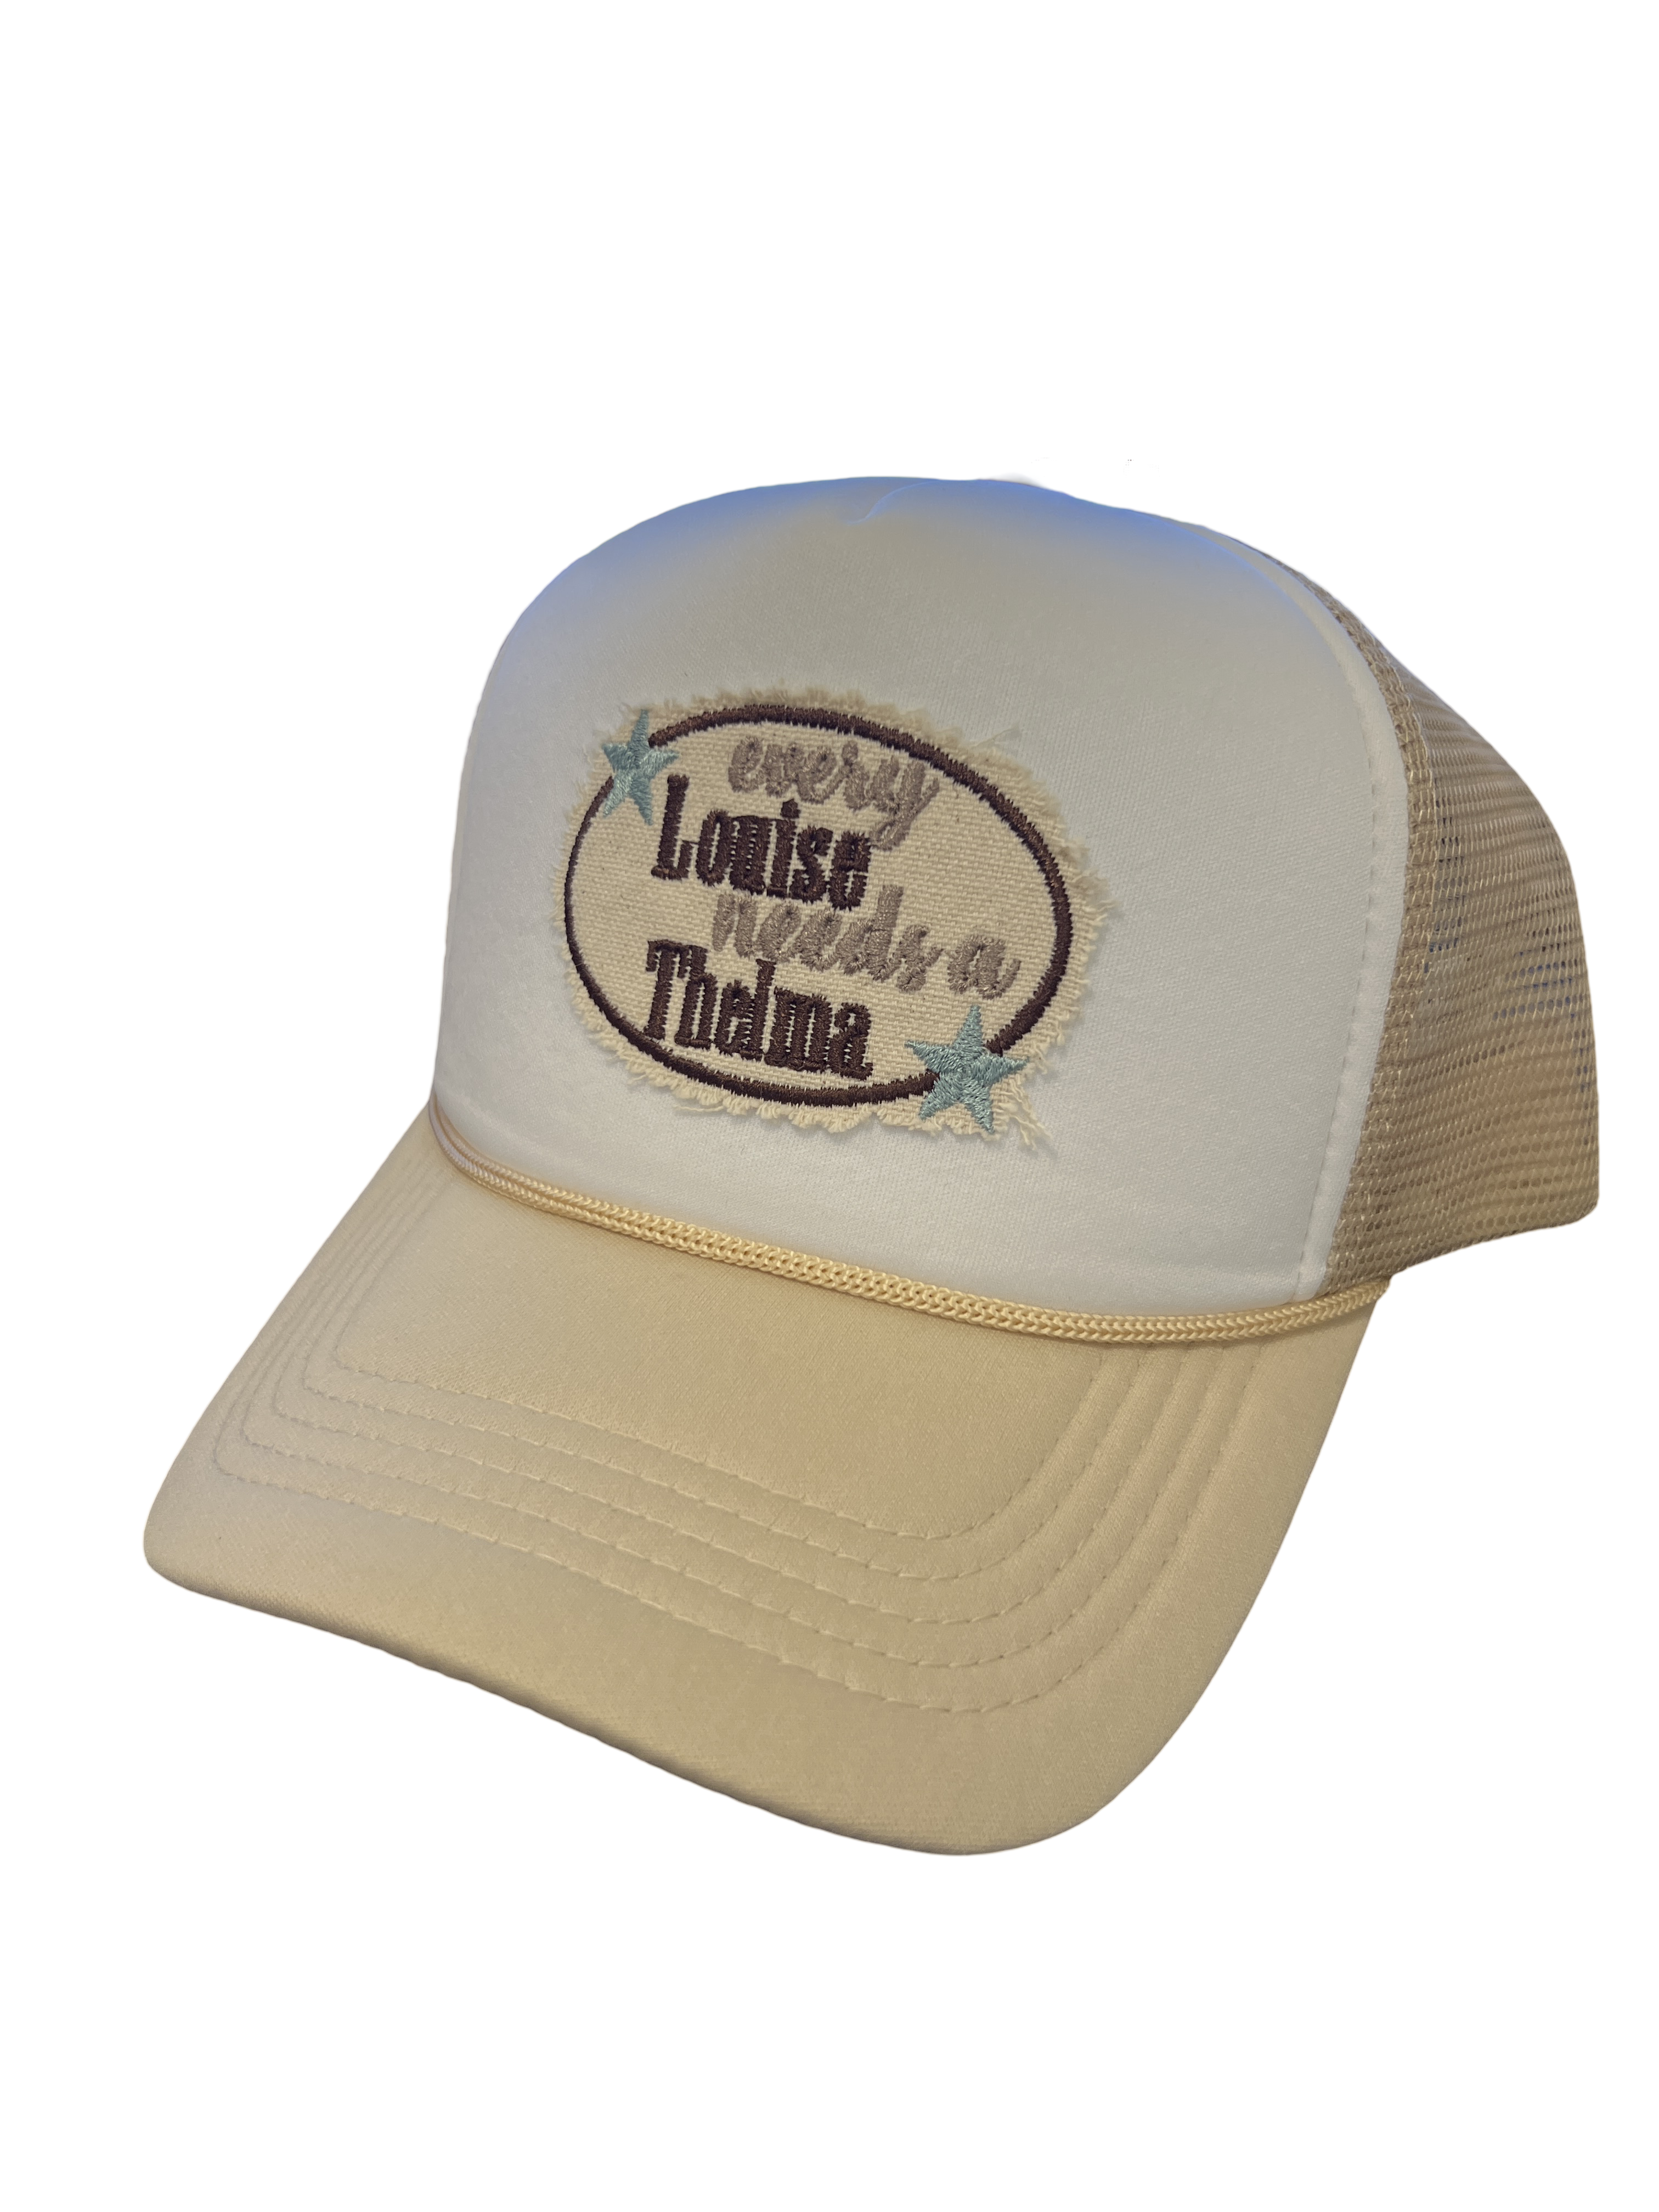 Foam Trucker Hat "Every Louise Needs A Thelma"